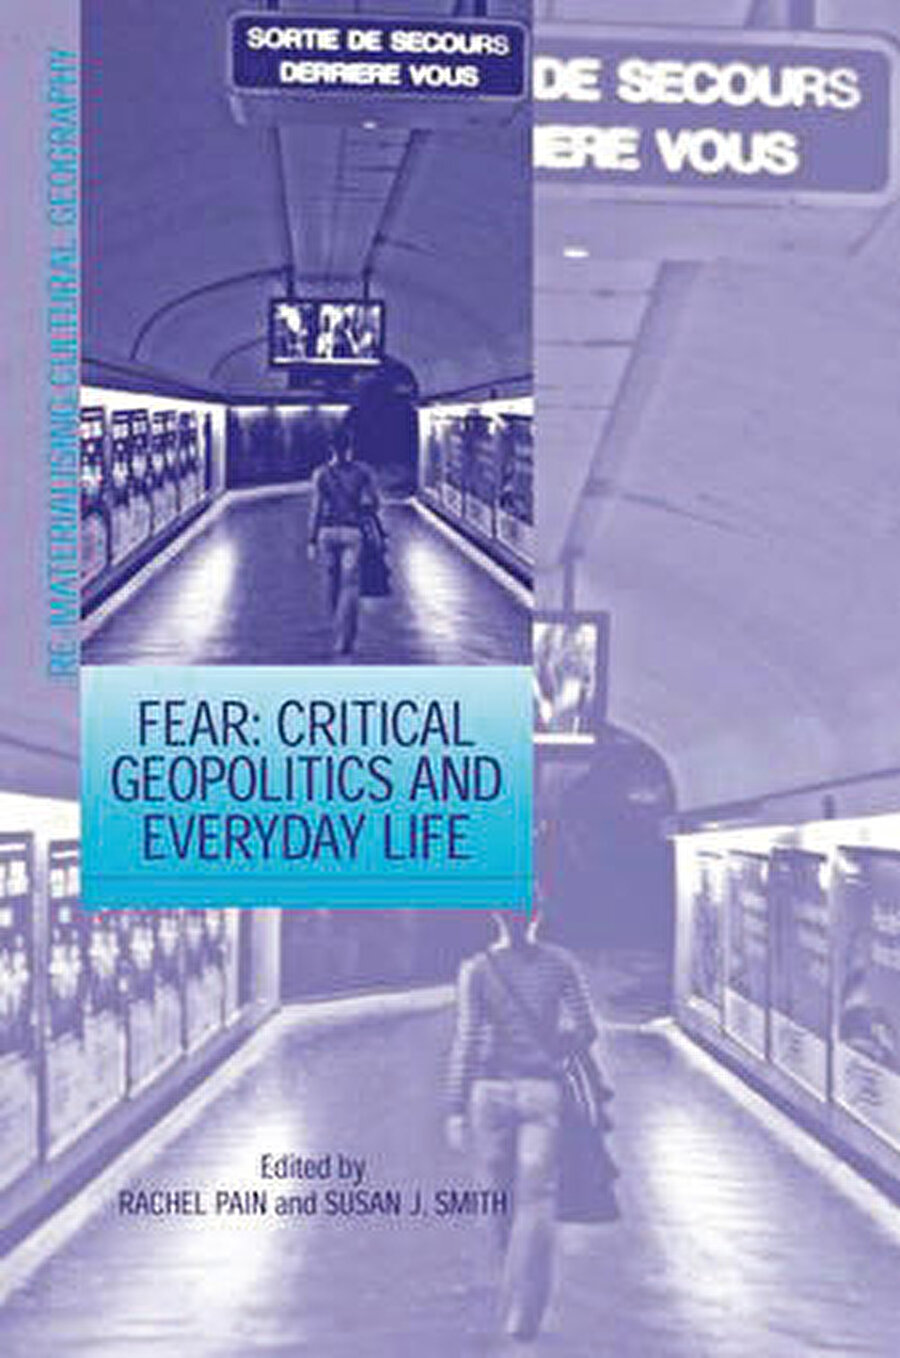 Susan J. Smith (Author), Rachel Pain (Editor), Fear: Critical Geopolitics and Everyday Life (Re-materialising Cultural Geography), USA, Routledge, 2008